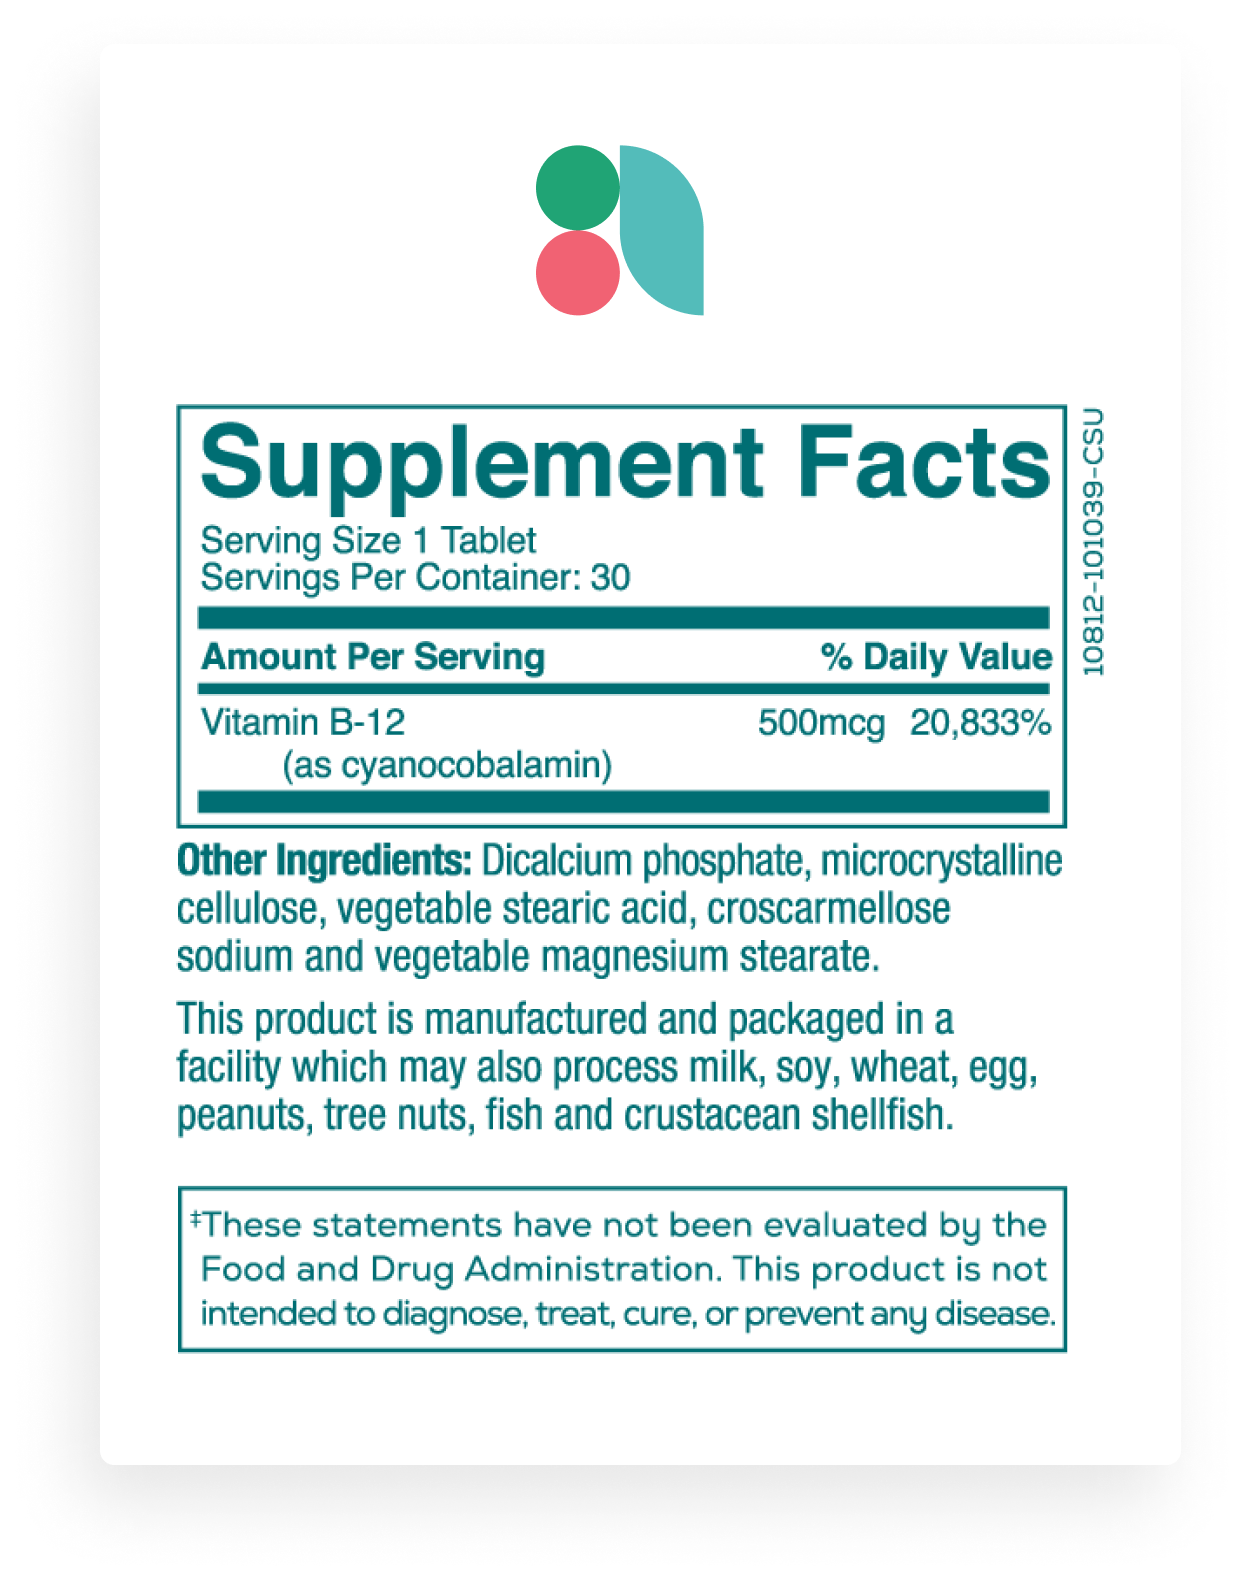 Supplement Facts for Vitamin B12 Tablets